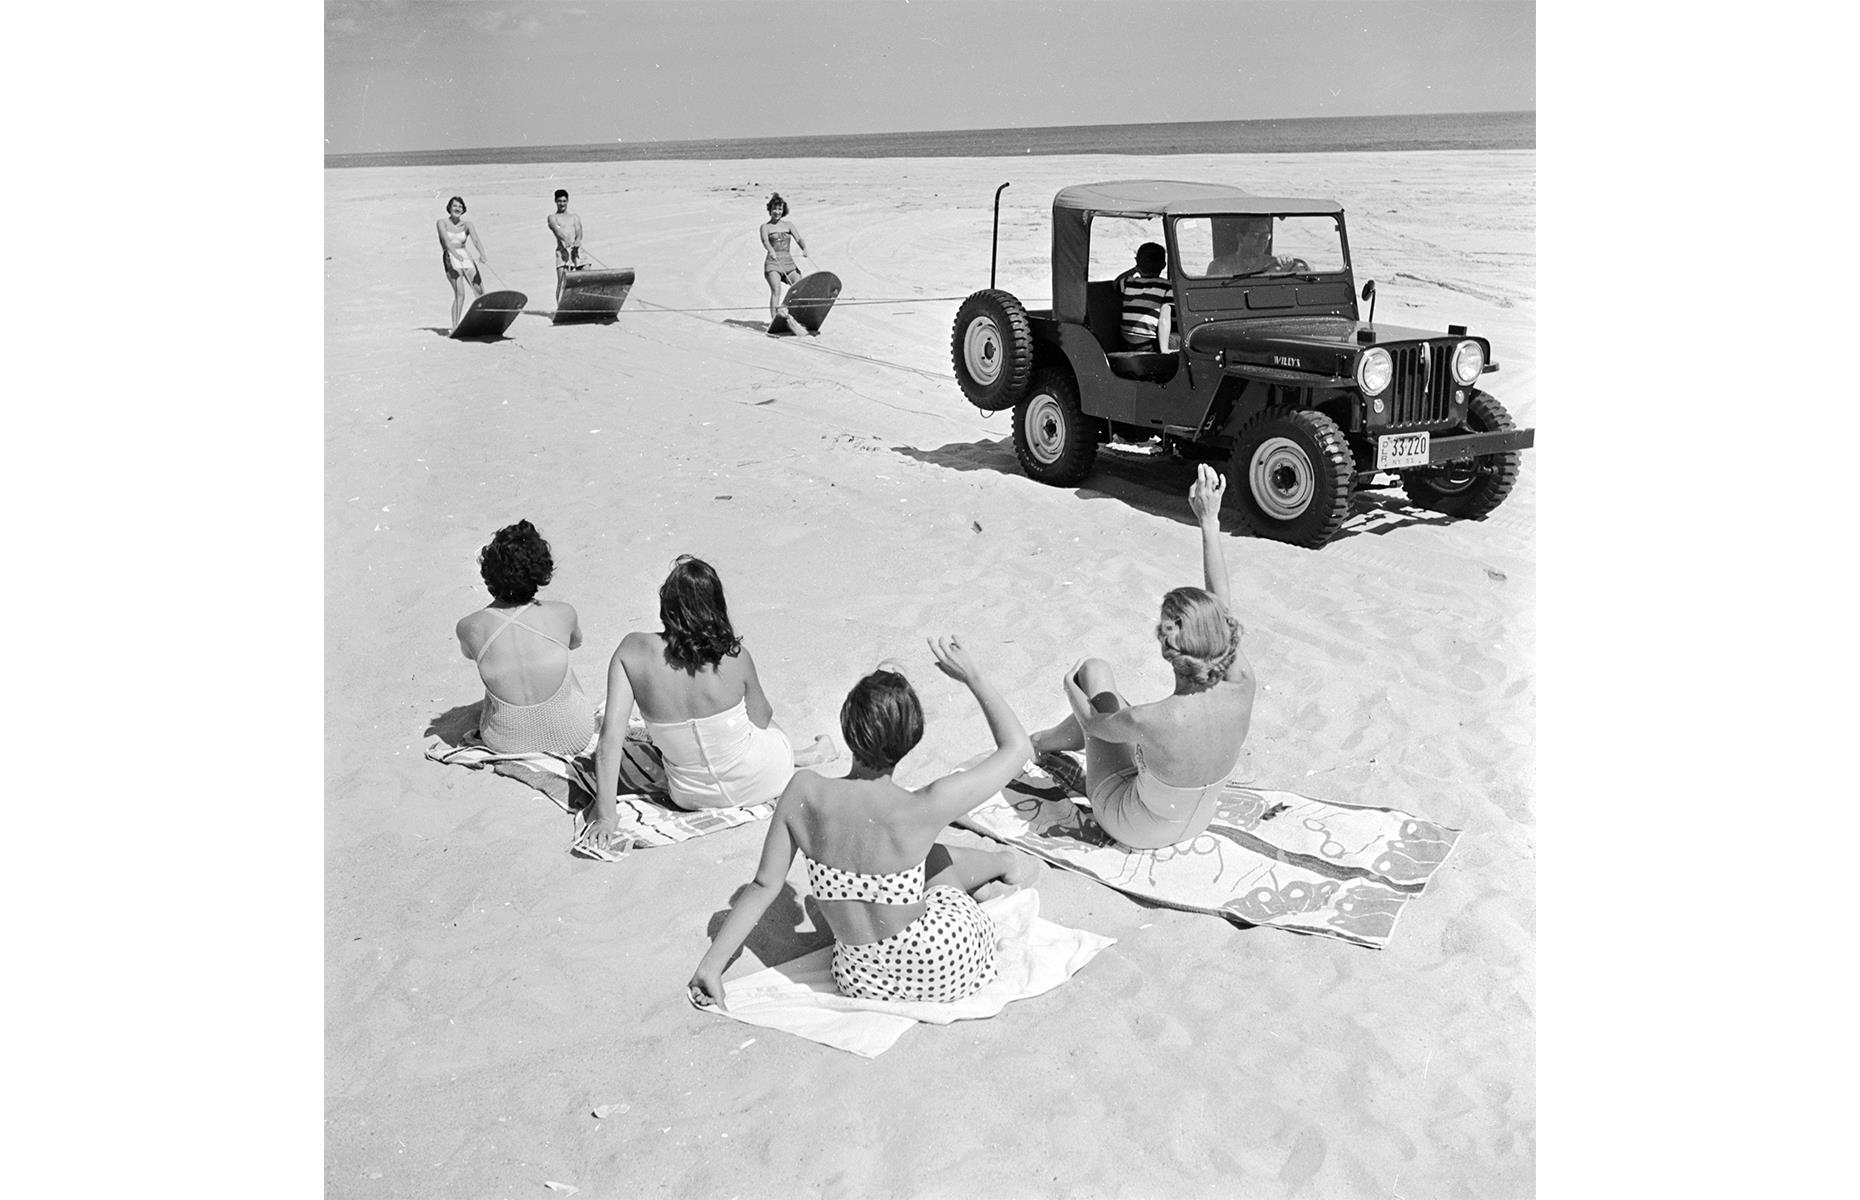 East of Coney Island, the hotels and resorts of Long Island attracted more wealthy vacationers, who relaxed in upscale areas such as The Hamptons. This dreamy stretch of sand is located close to Southampton. Pictured here in the 1950s is a group of young sun-worshippers, some of them sand-surfing off the back of an ATV.